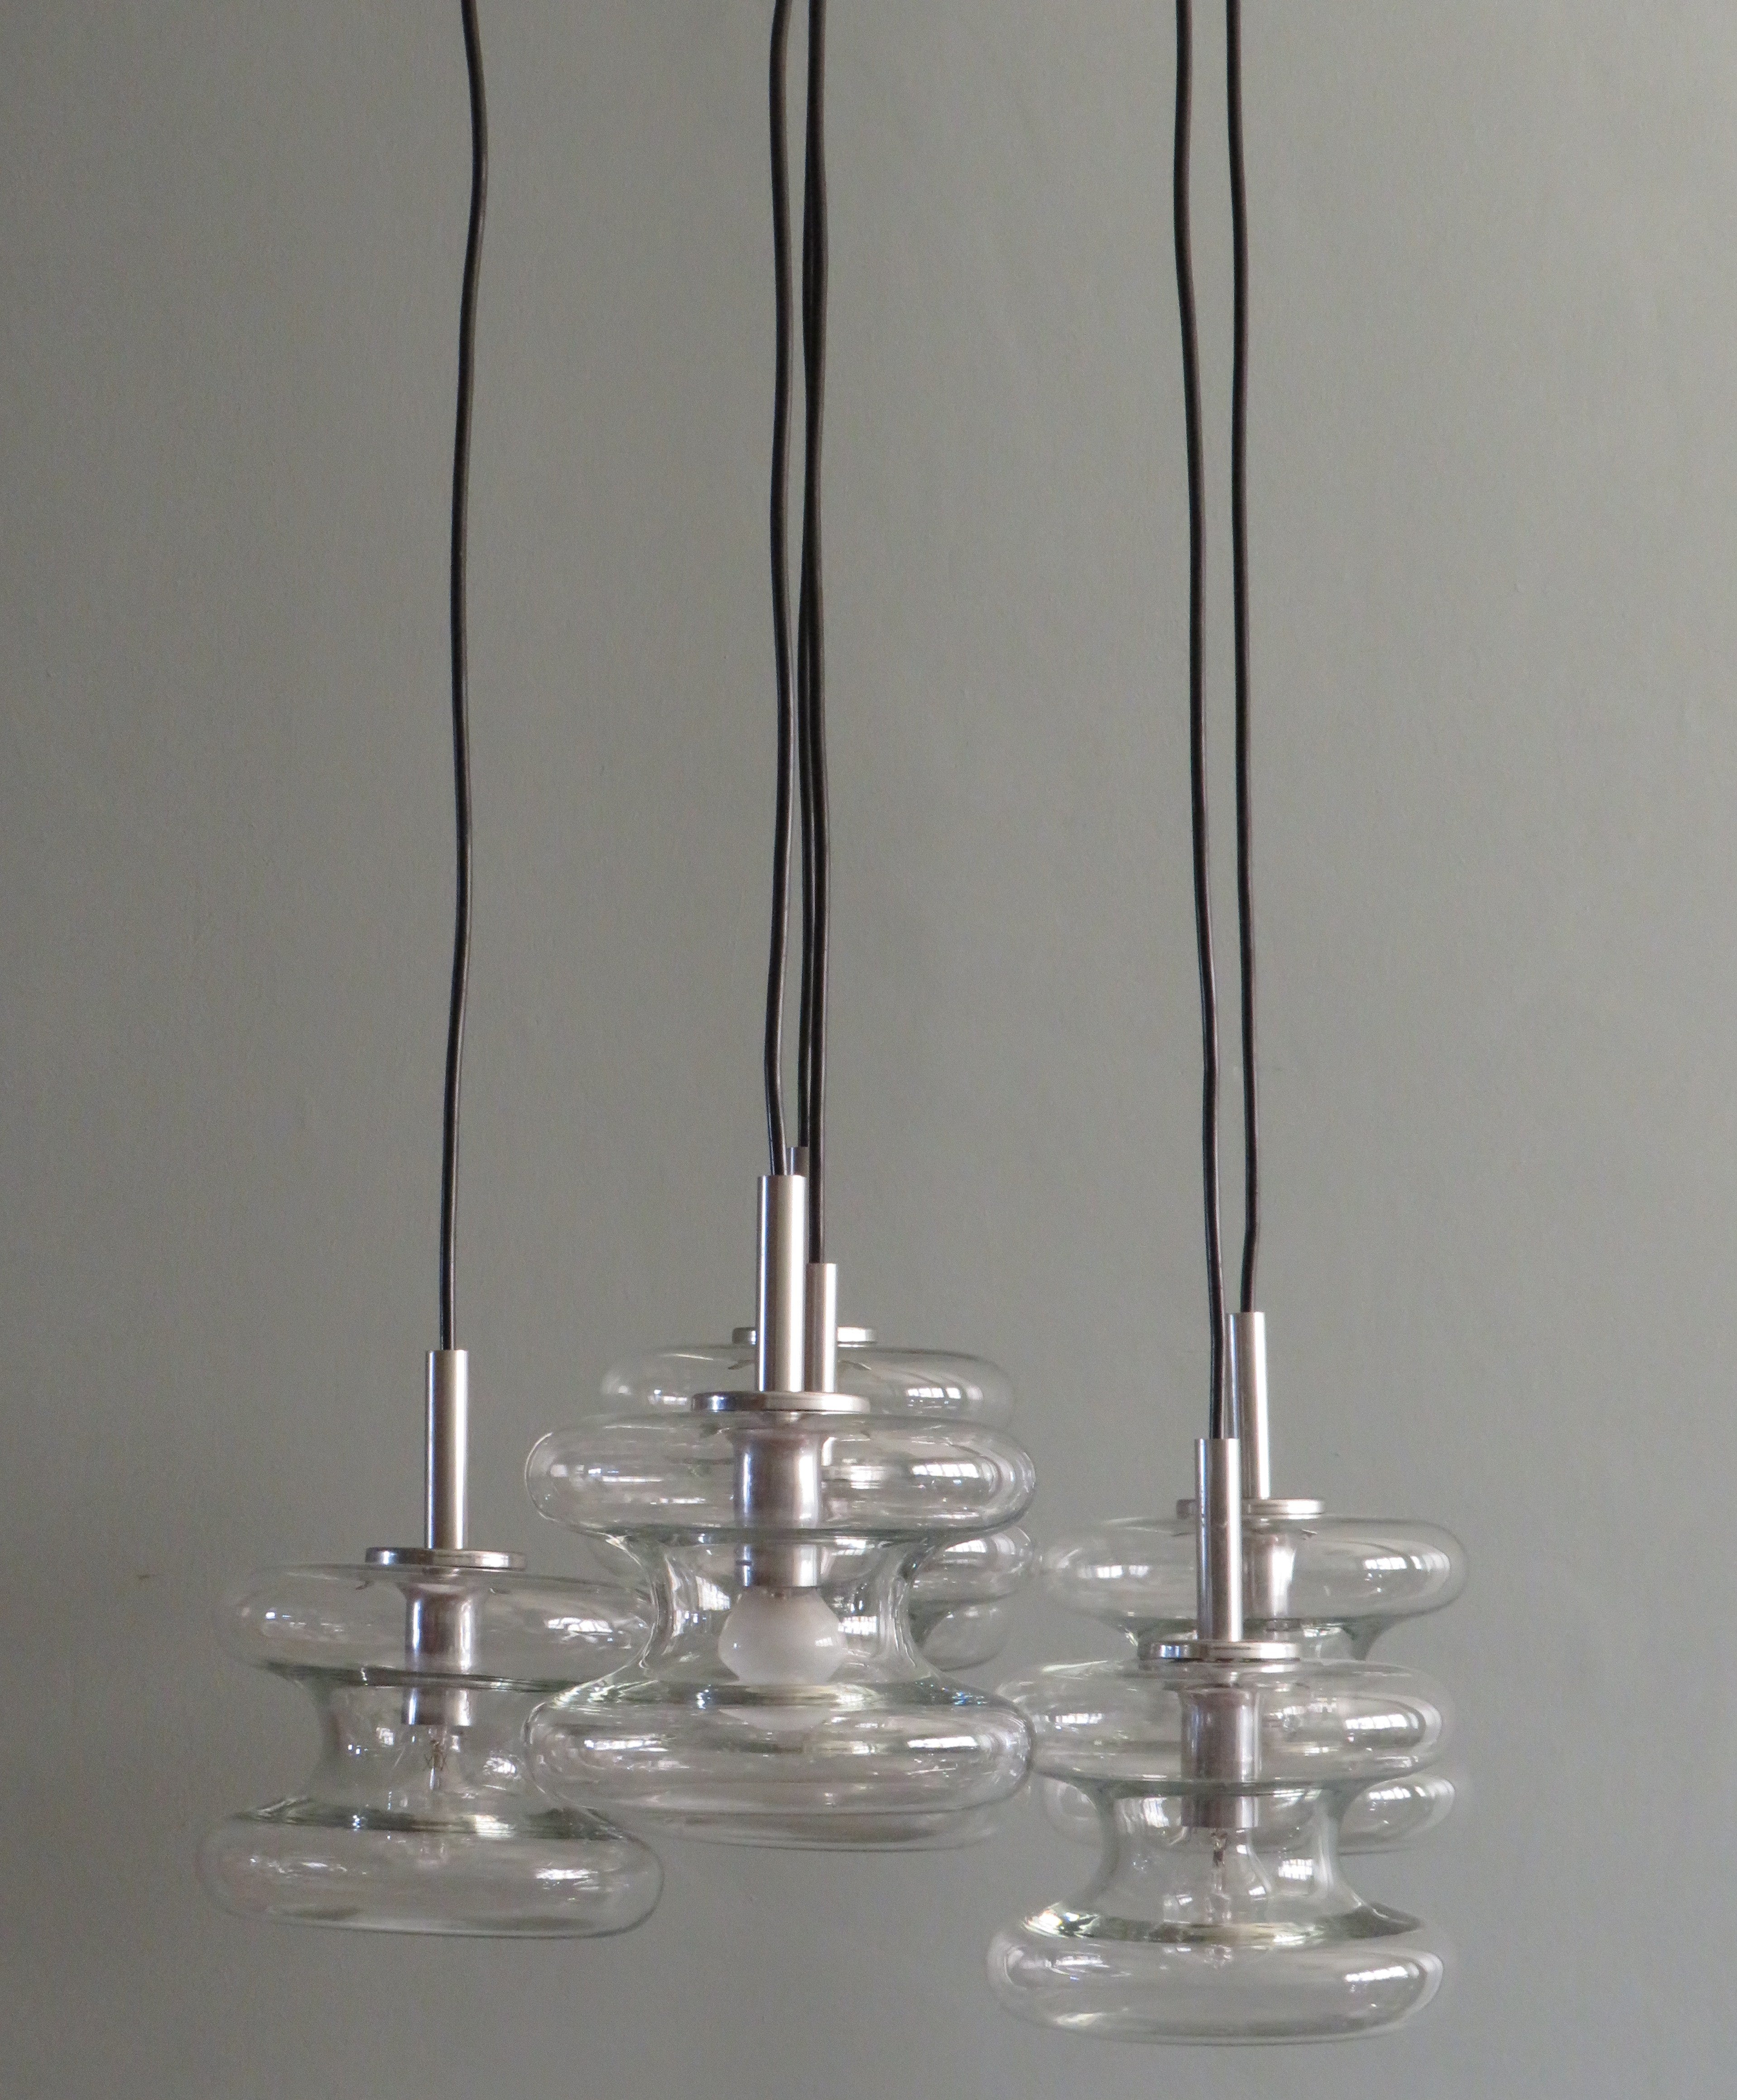 Mid century cascade chandelier by Doria Leuchten, Gemany 1960s.
This remarkable chandelier has 6 separate light points with closed glass shades.
The length of the lights can each be individually adjusted to the length of your choice.
The brushed